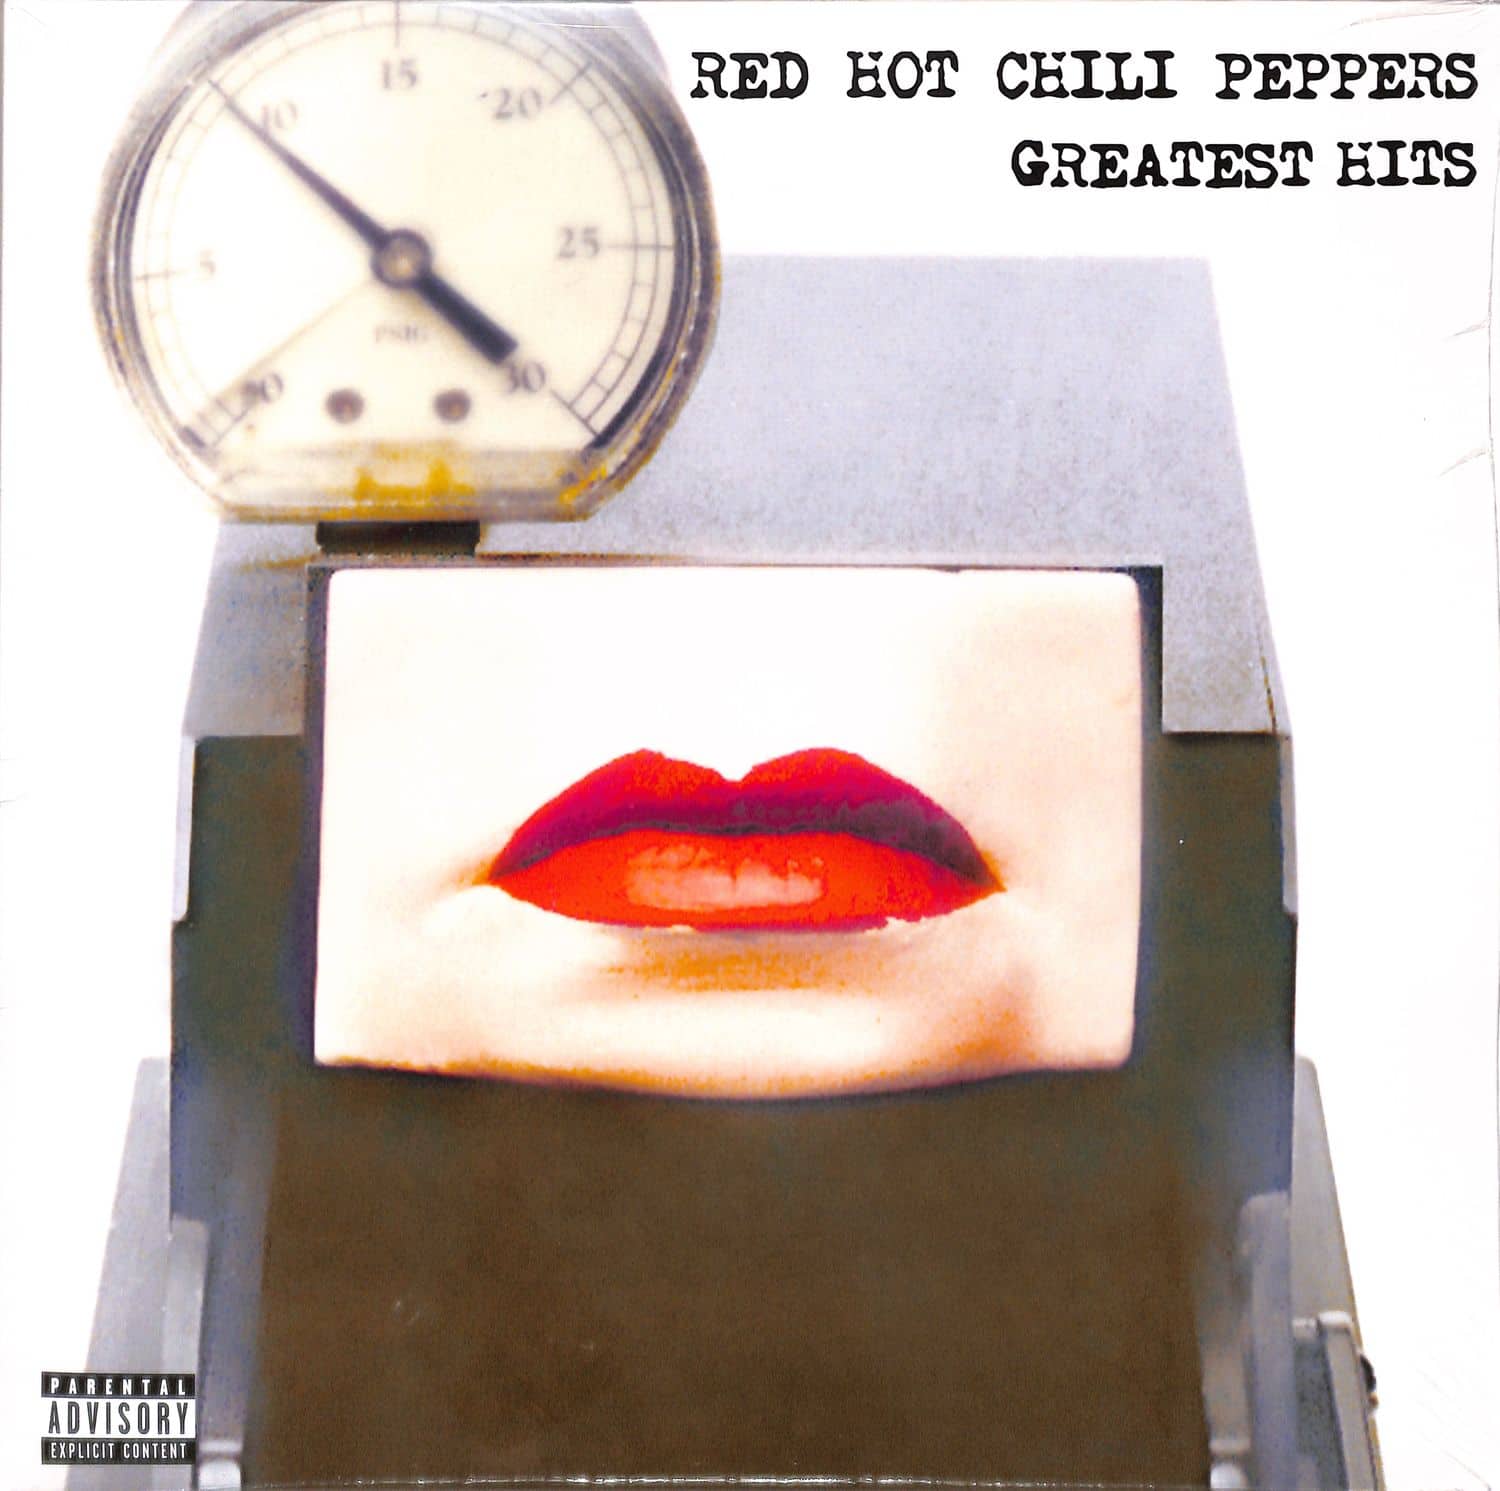 Red Hot Chili Peppers - GREATEST HITS 